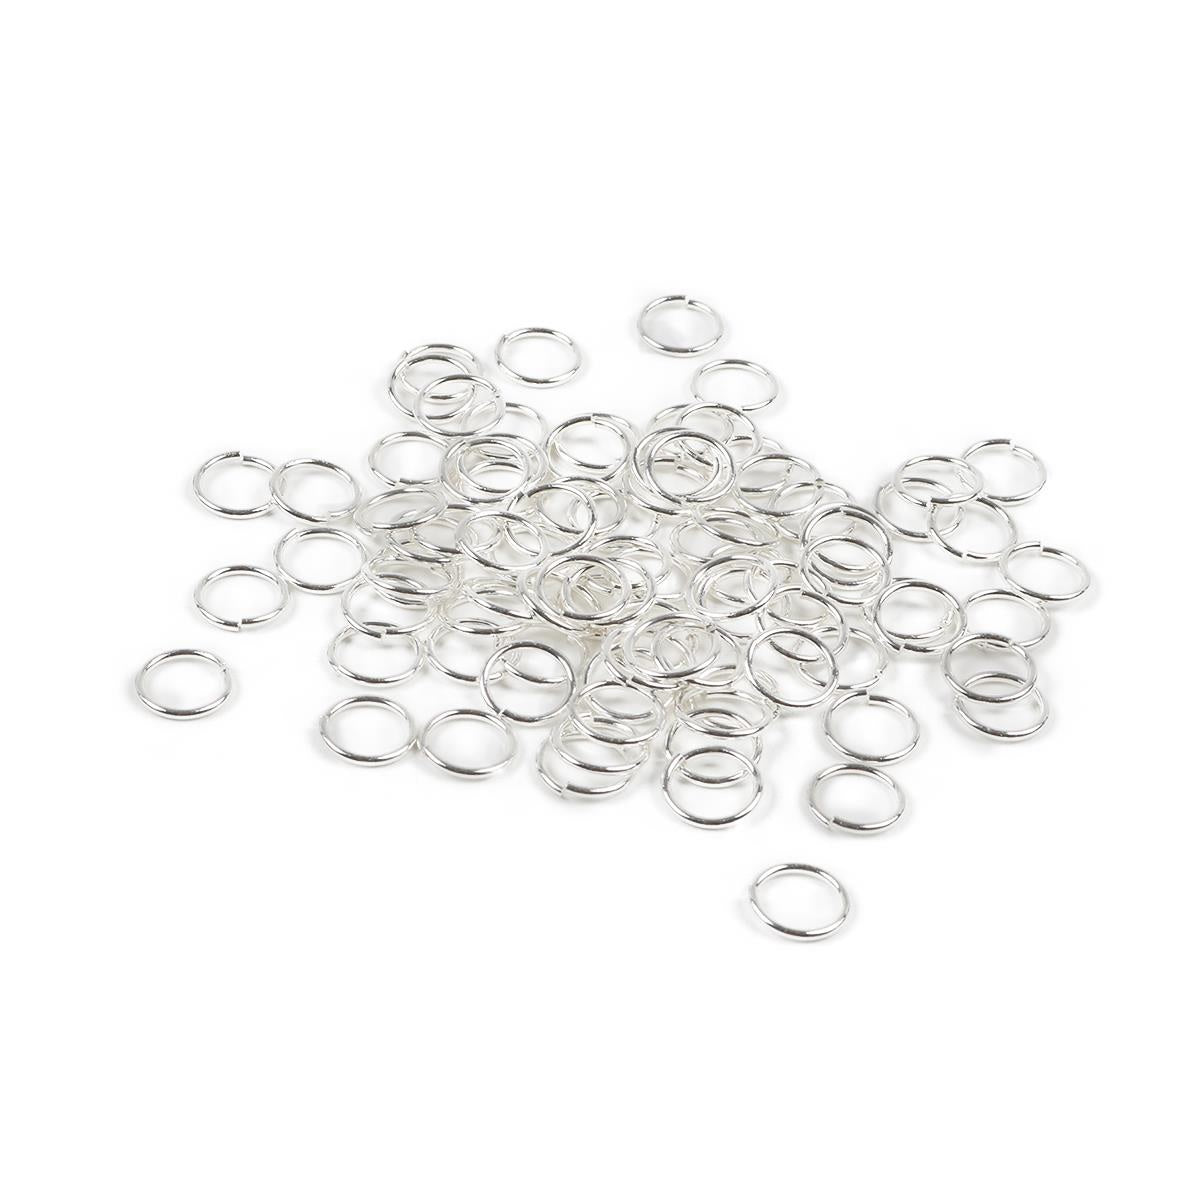 Gold Filled 3mm I.D. 18 Gauge Jump Rings, Pack of 20 – Beaducation